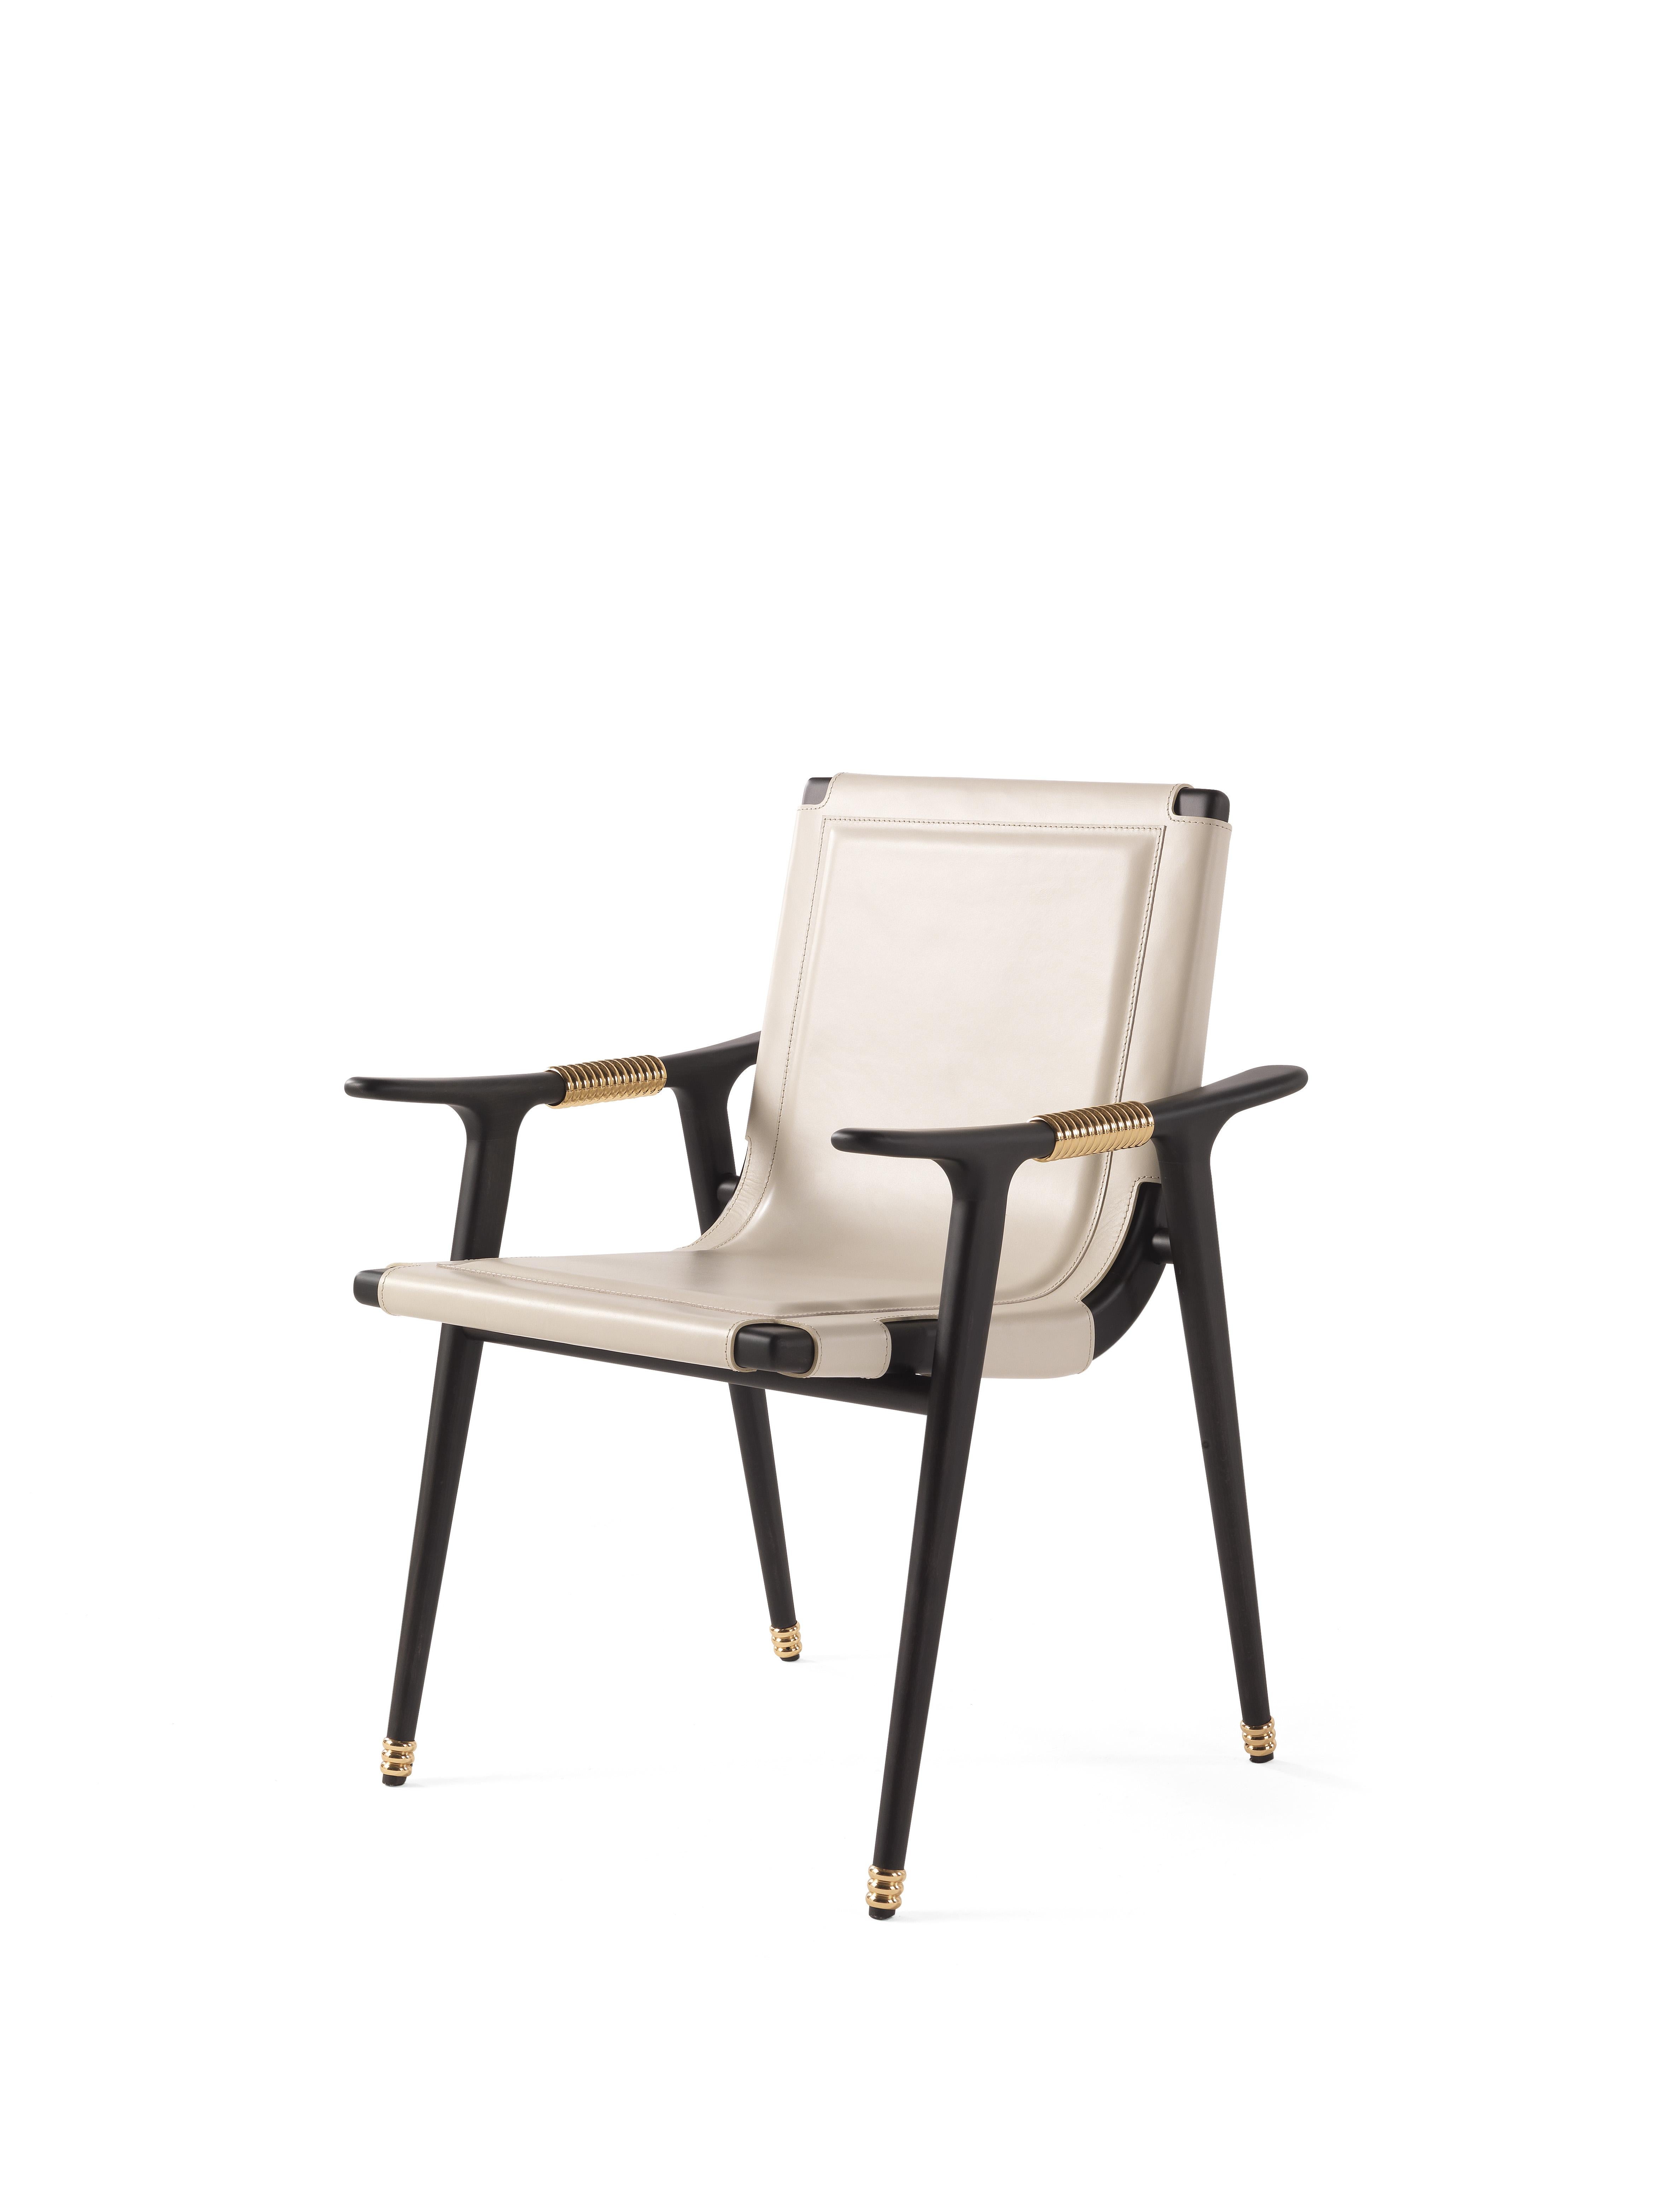 Dinka is a chair full of fascinating details and evocative references.
The precious upholstery in ivory saddle leather features special eyelets lace-up on the back.
The structure with matt dark wengè dye is enriched by polished brass rings,